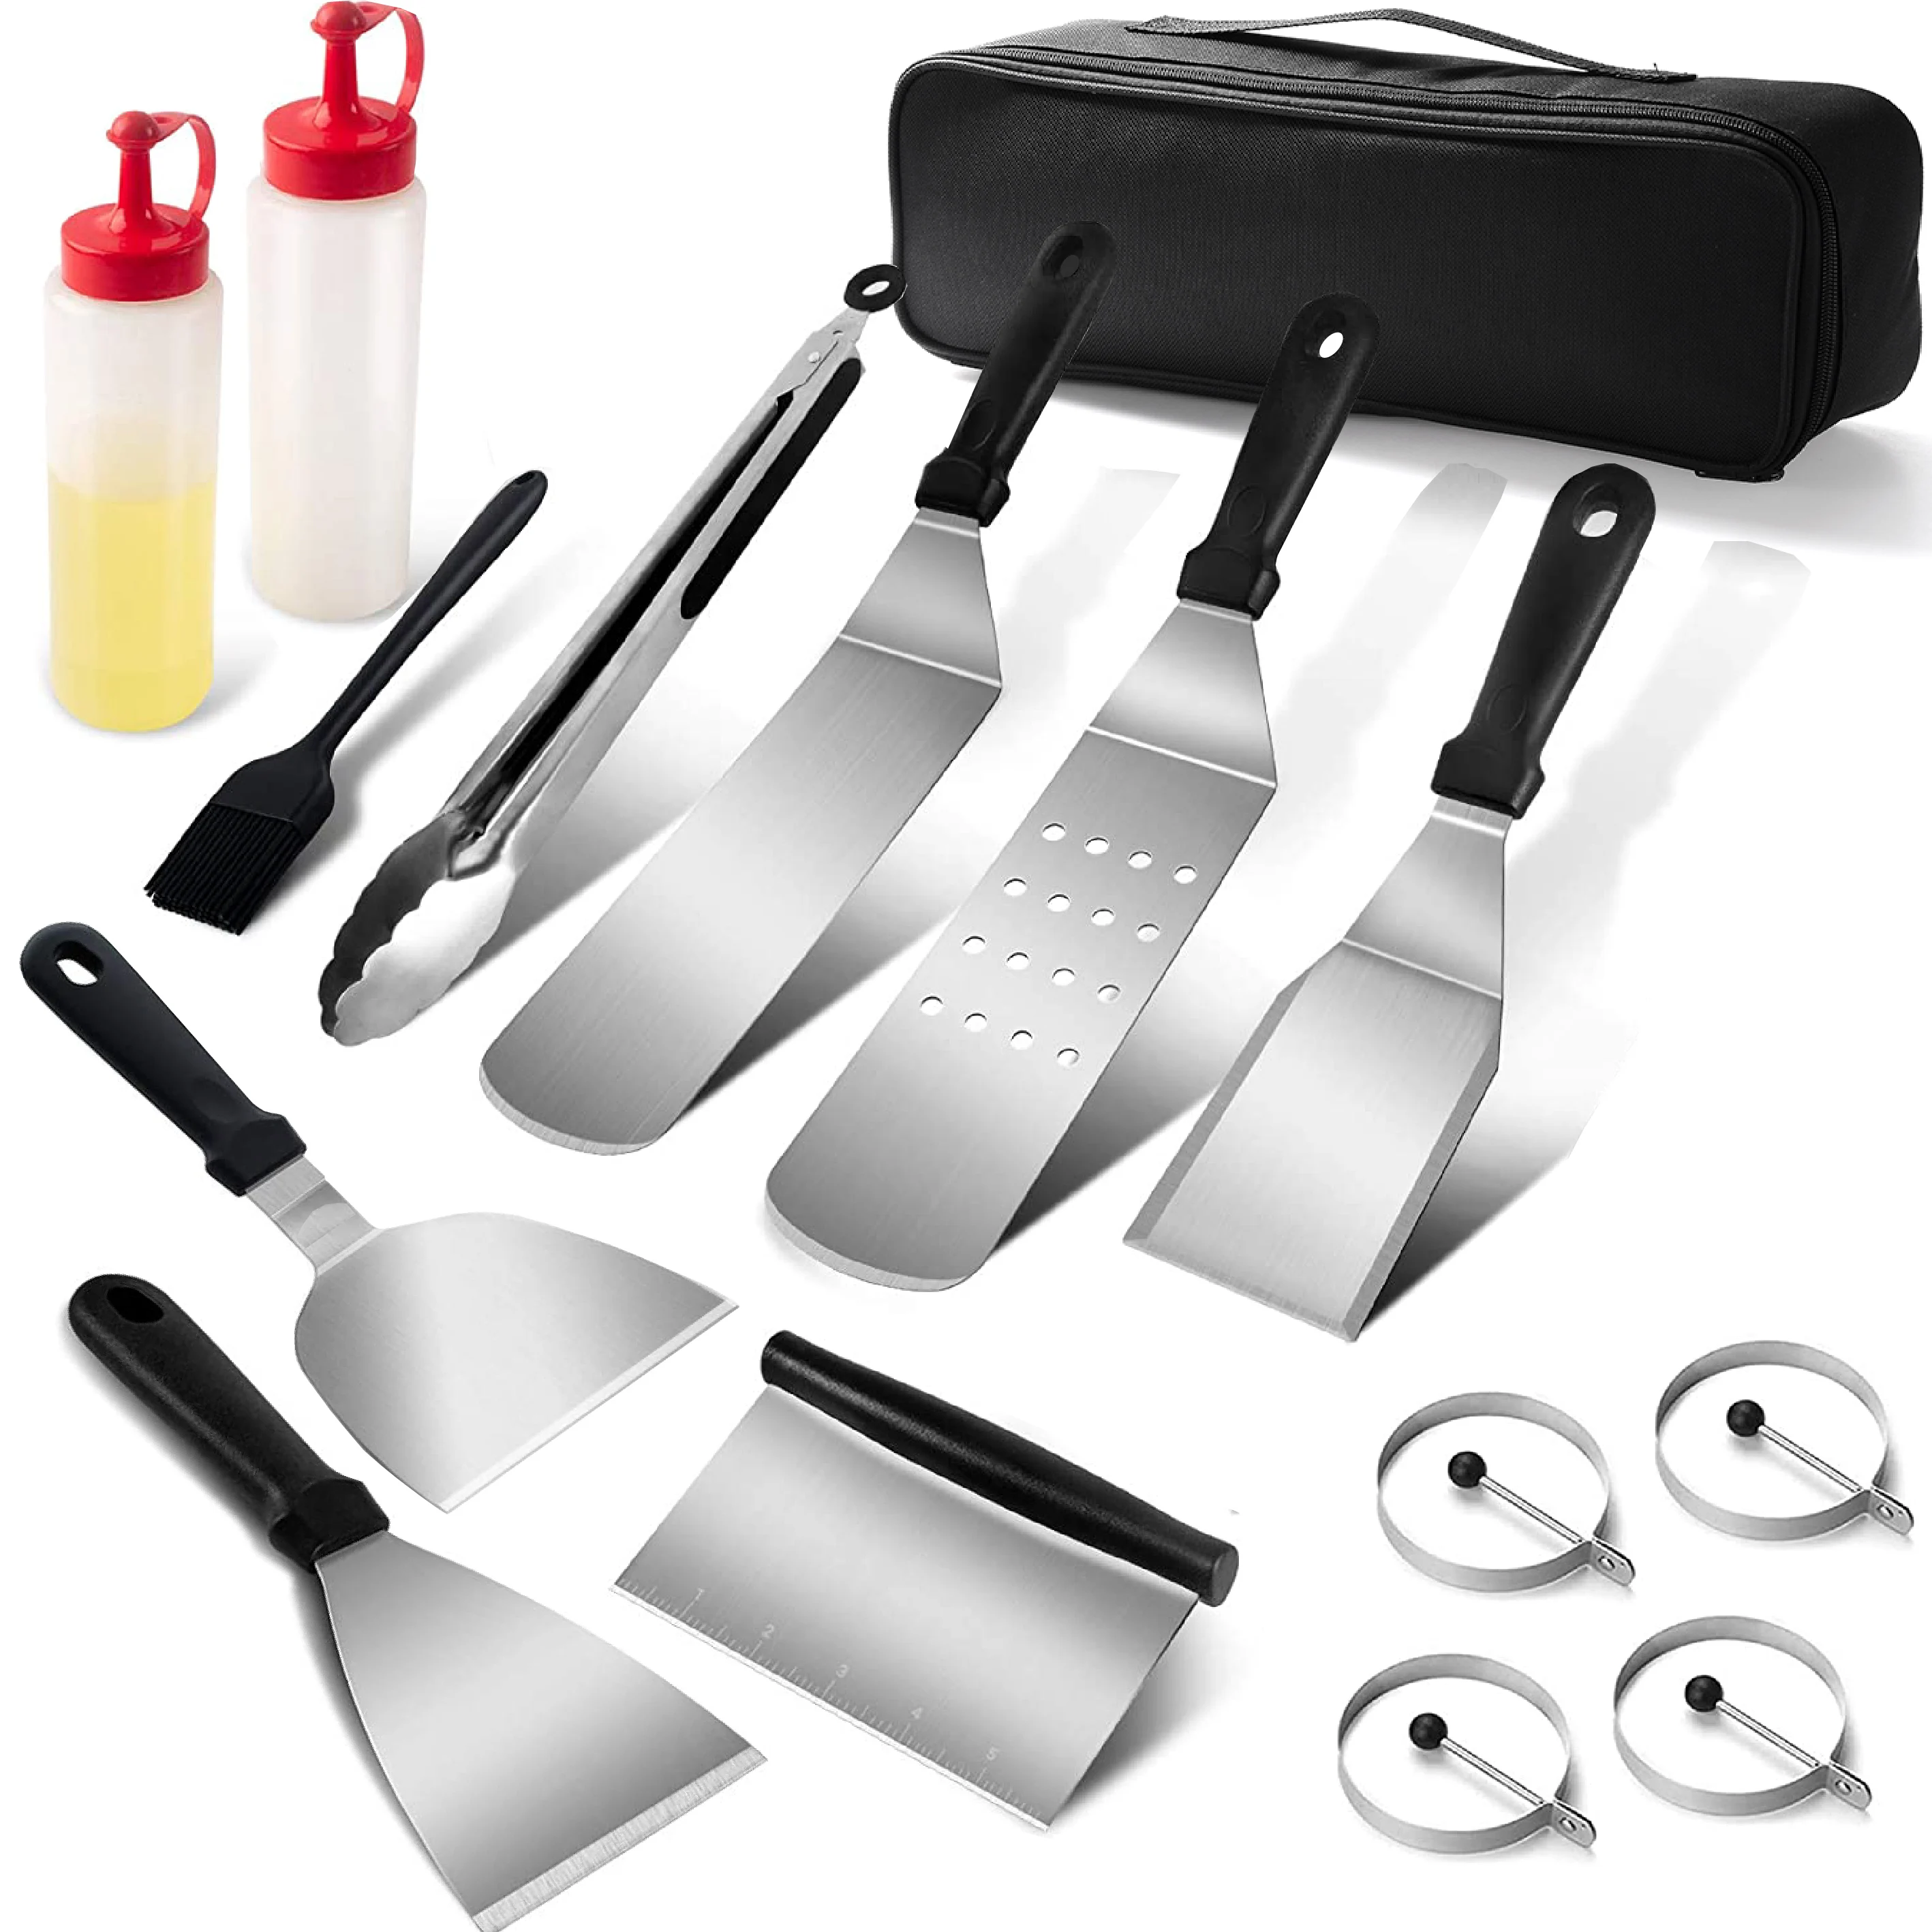 

Amazon Hot Selling Stainless Steel Spatula Restaurant Turner and Bottles BBQ Griddle Accessories Tools Kit, Black